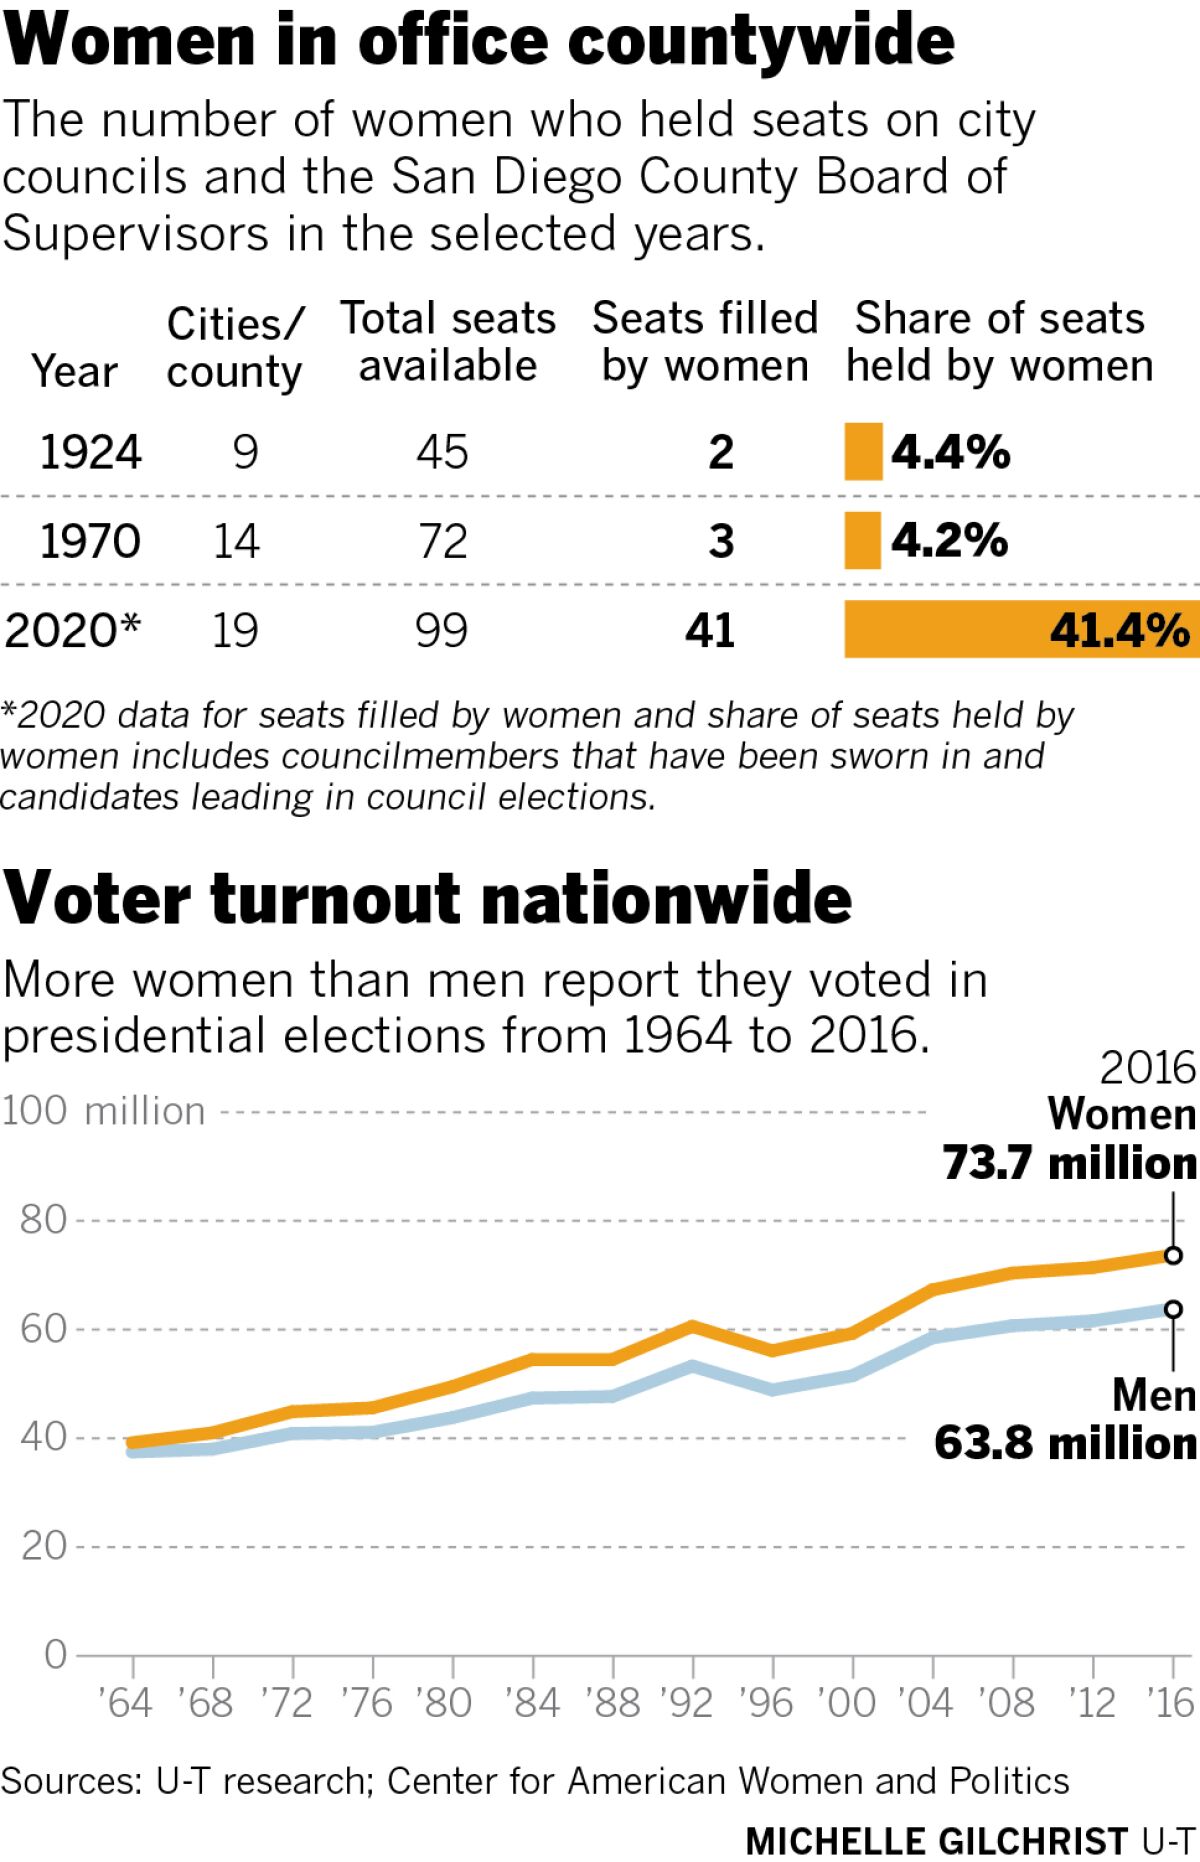 Women in office countywide; Voter turnout nationwide